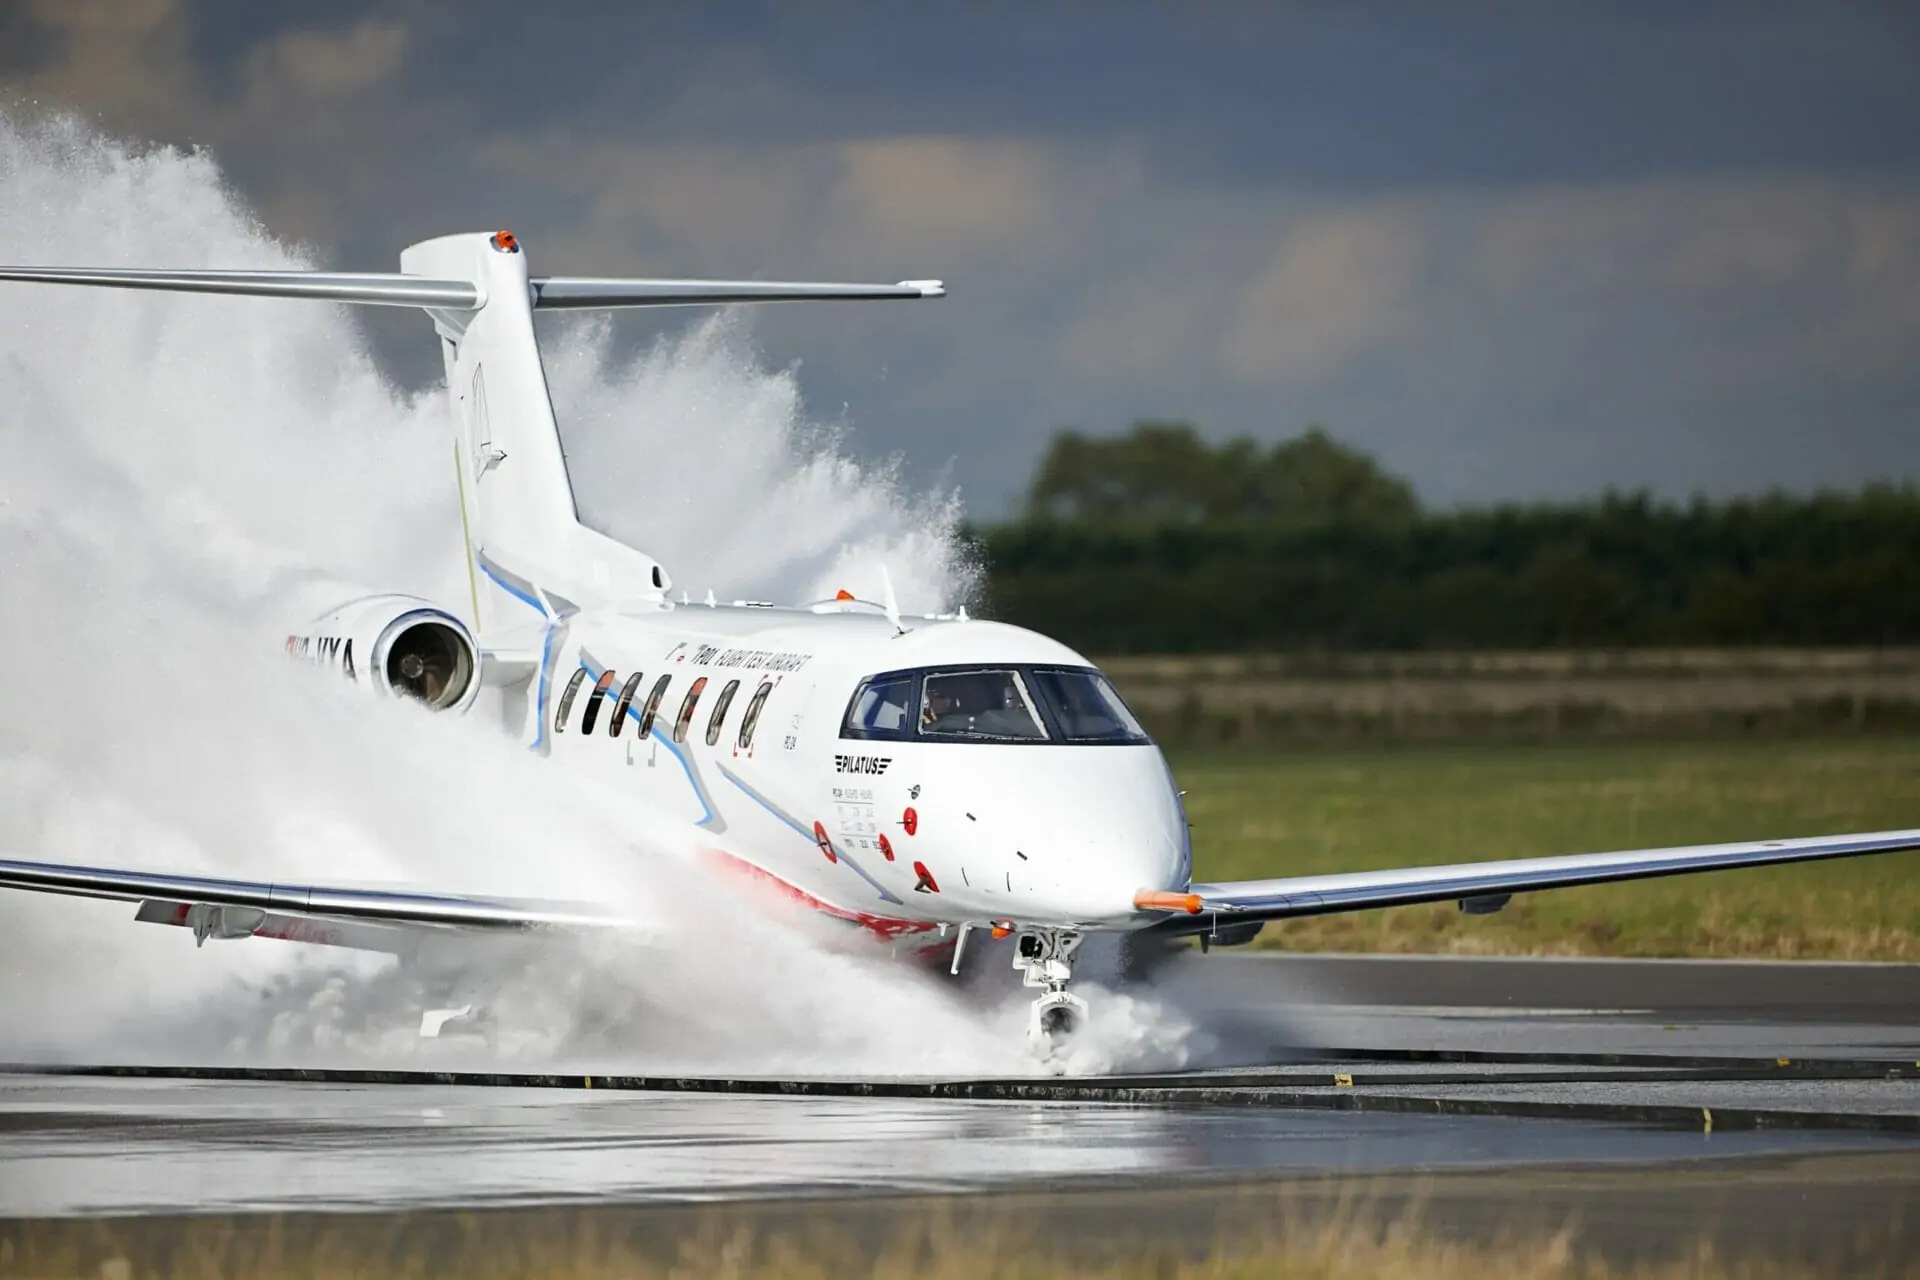 pilatus pc-24 water ingestion test - are private jets safer than commercial